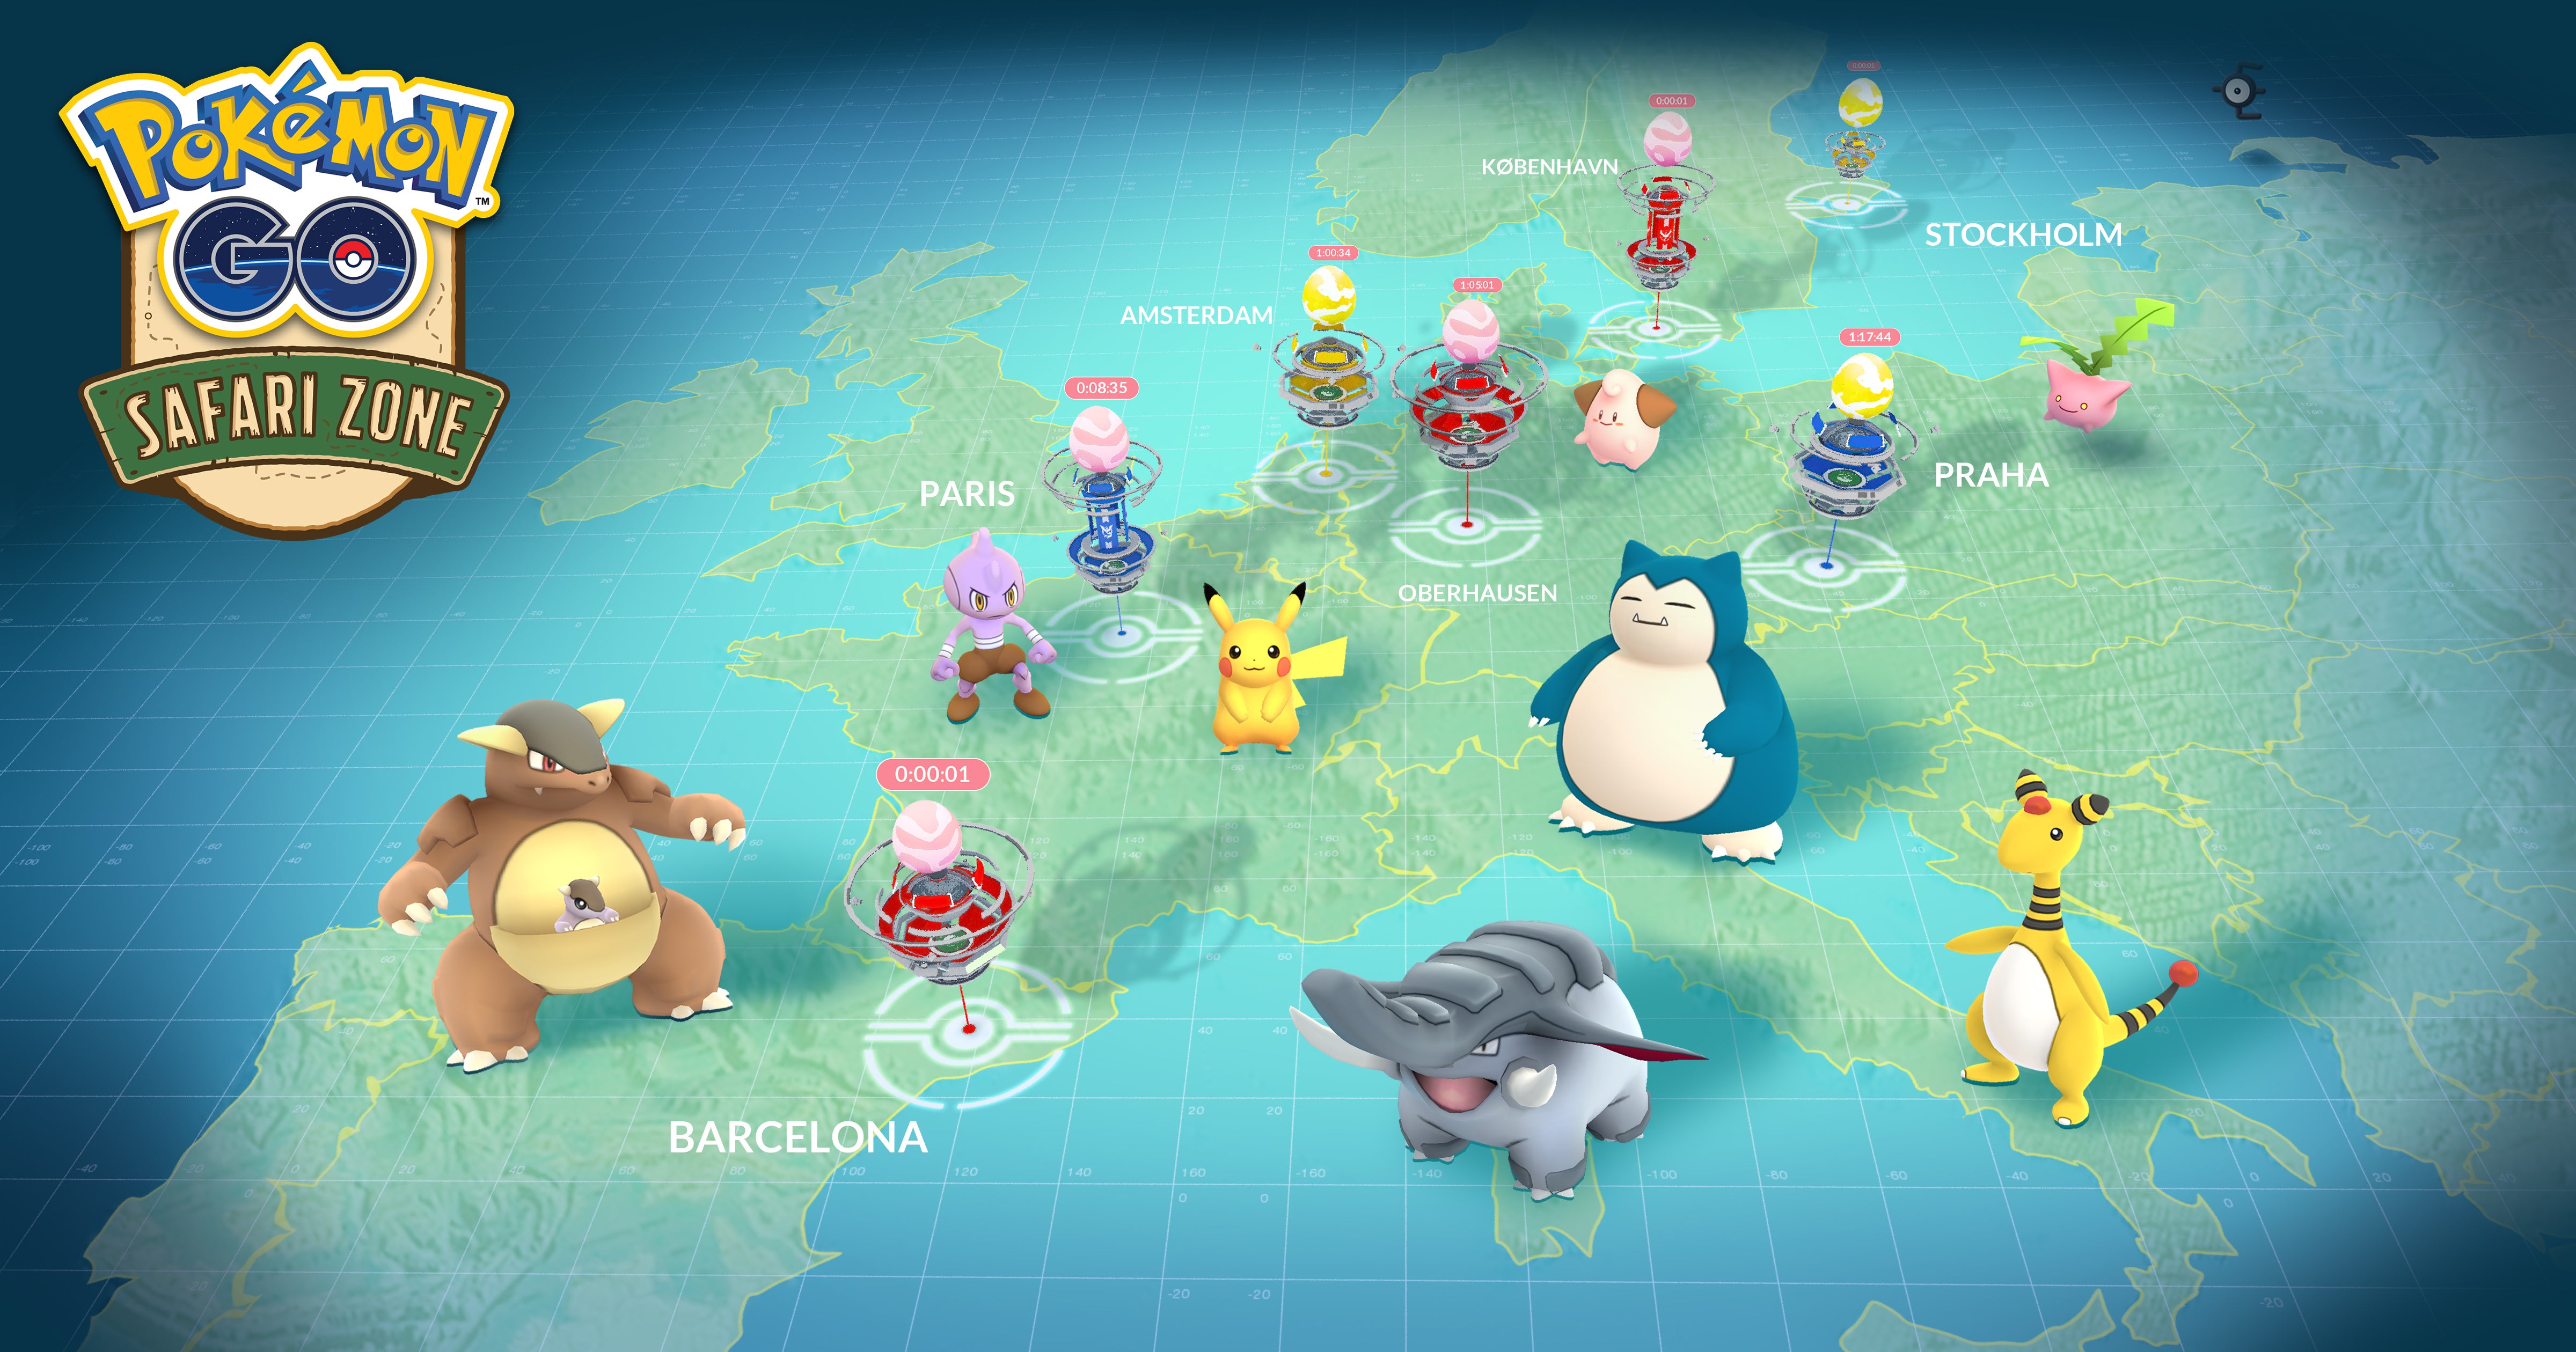 Image for Pokemon Go worldwide live event being held alongside Pokemon Go Fest, events in Europe and the UK also announced